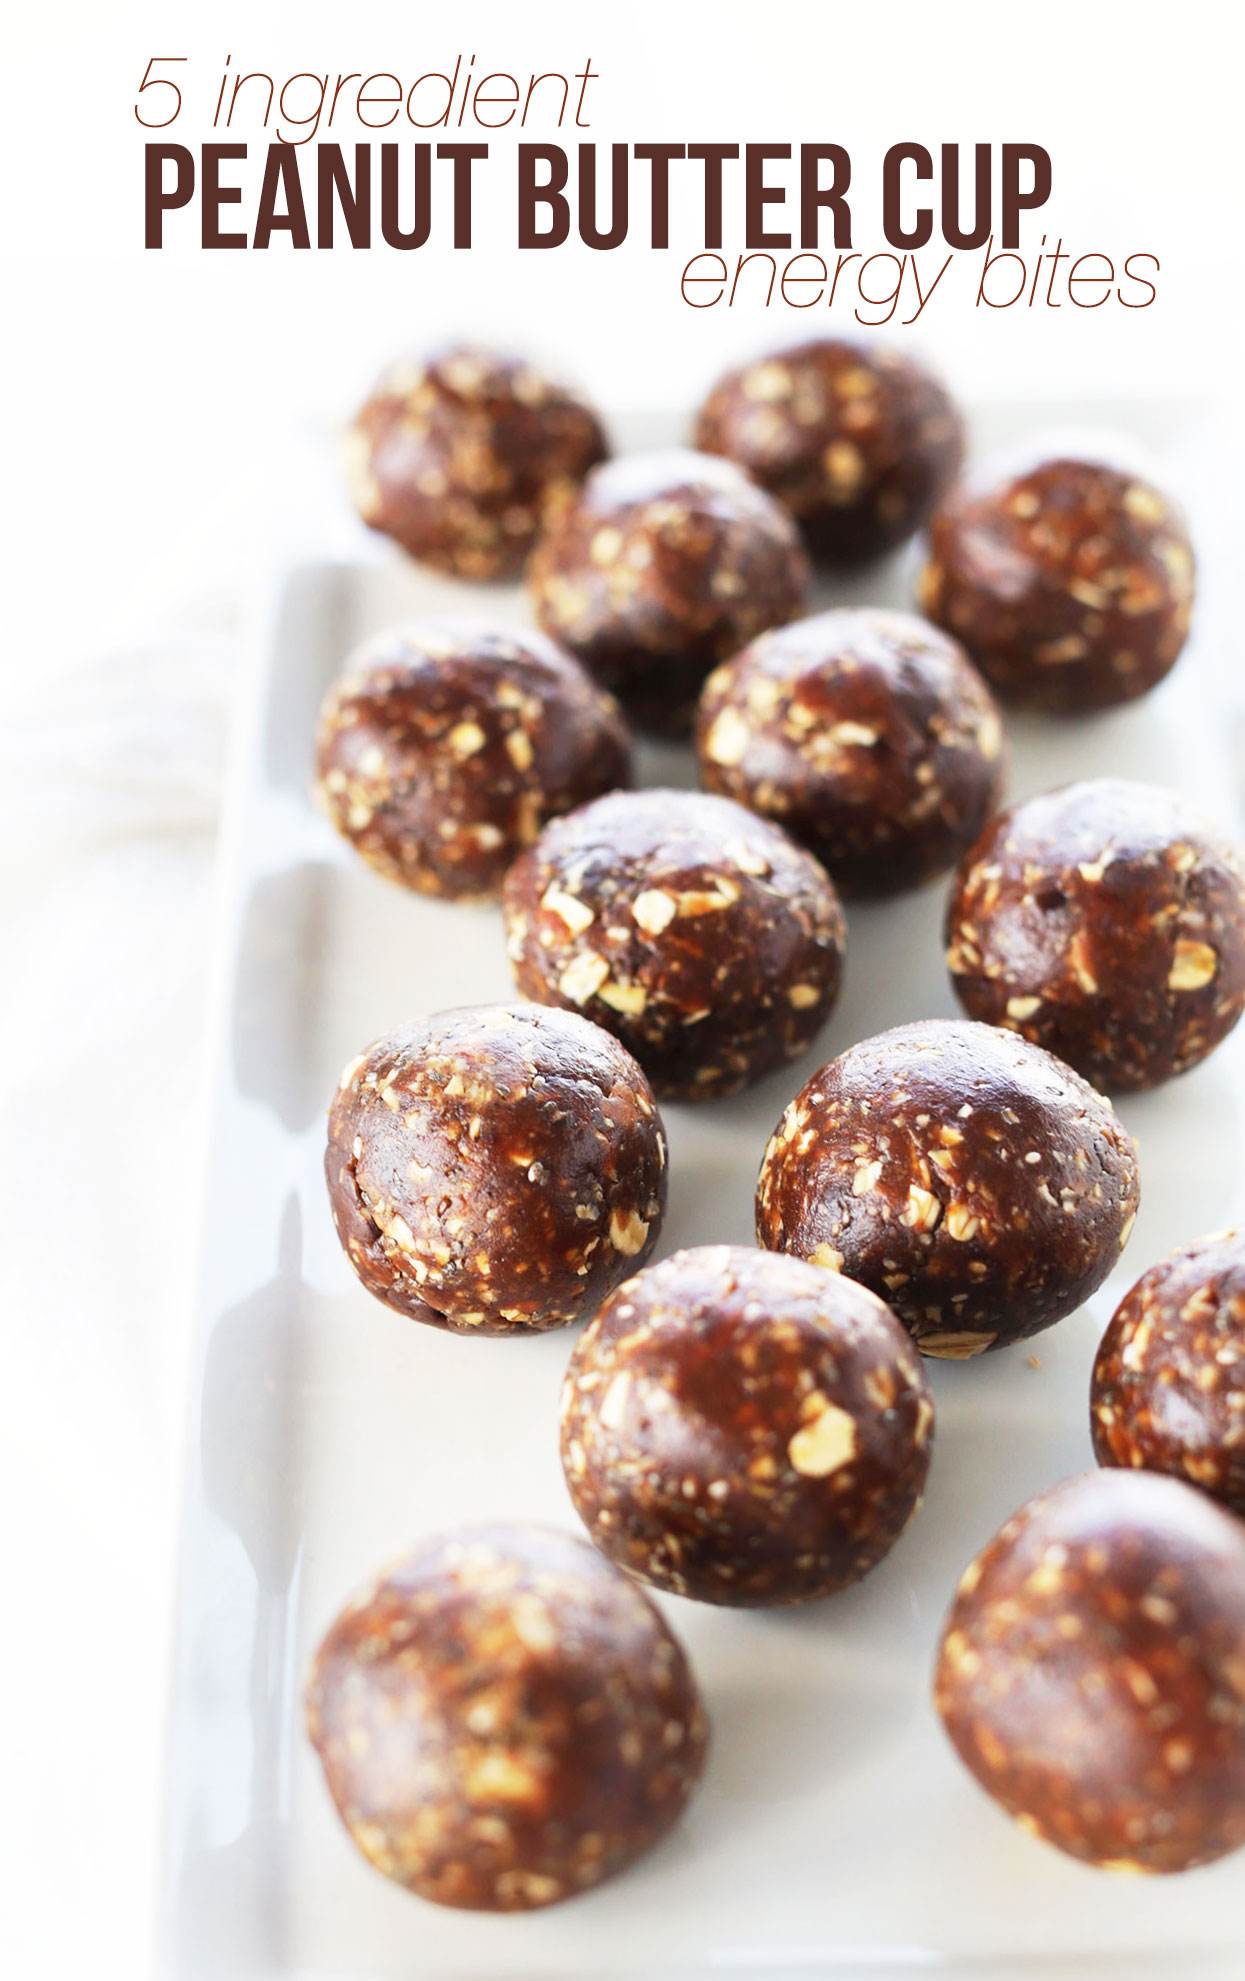 Homemade PB Cup Energy Bites for a delicious protein-packed vegan snack